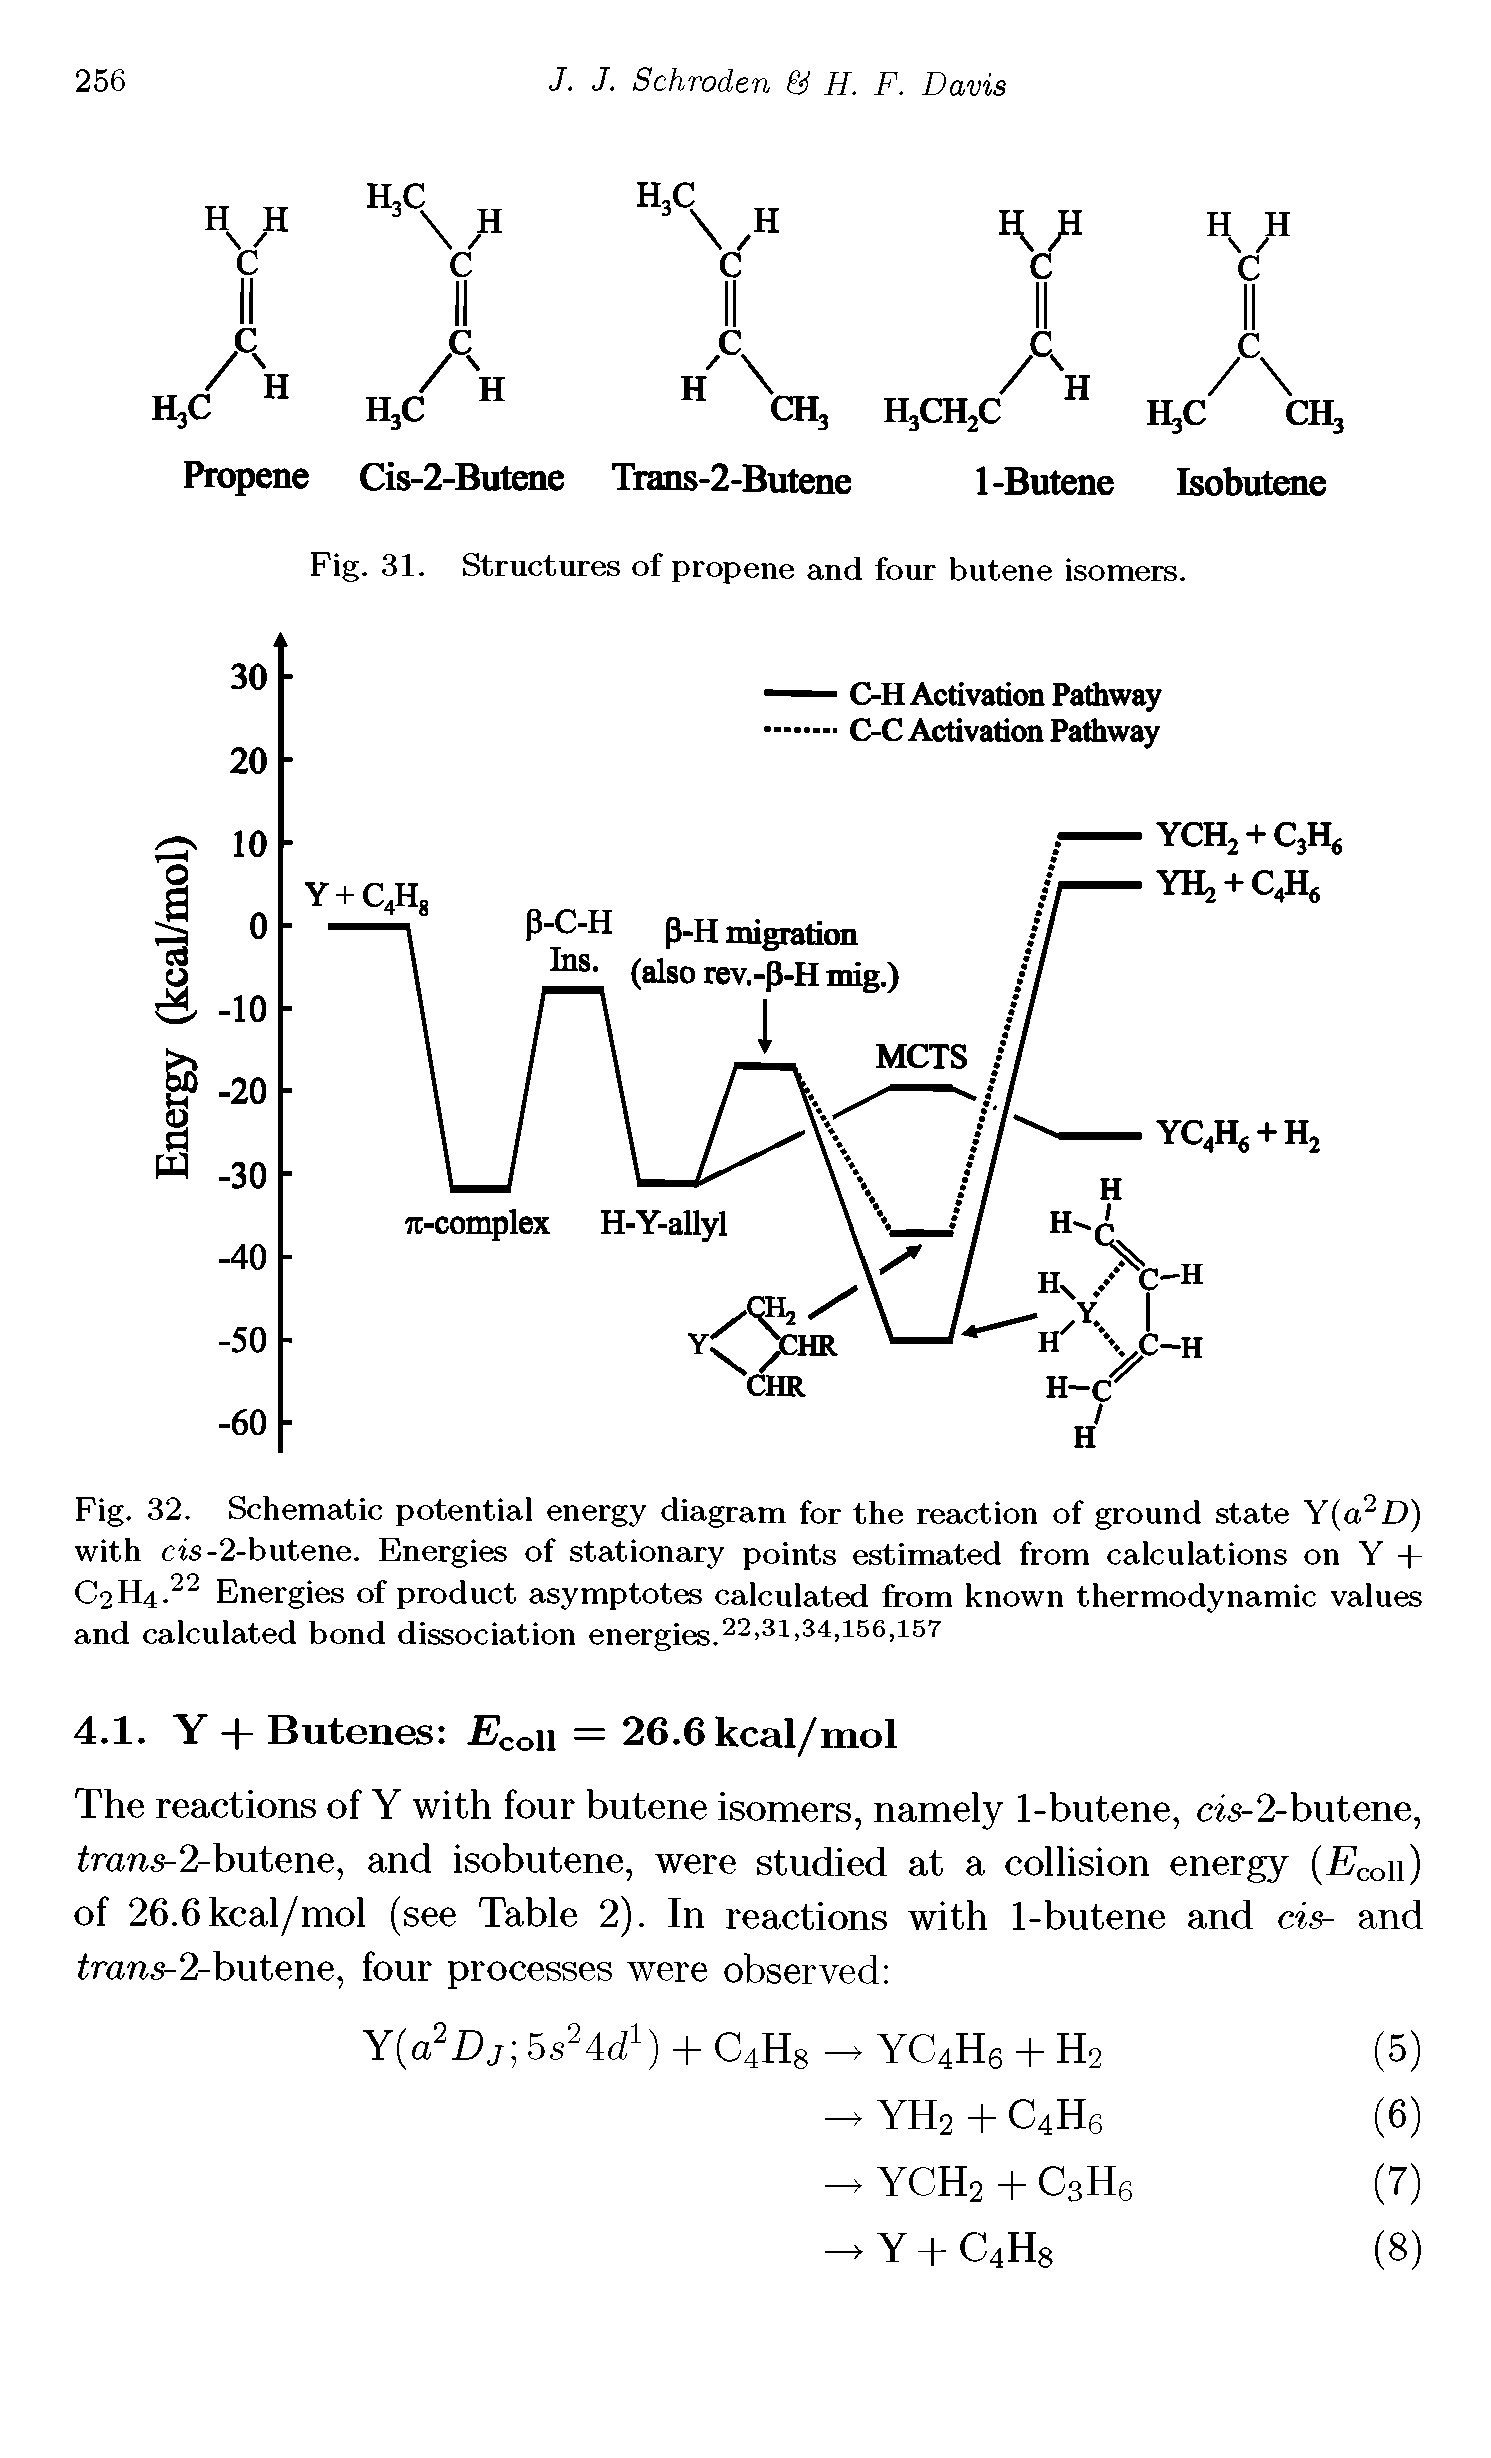 Fig. 32. Schematic potential energy diagram for the reaction of ground state Y(a2 D) with cis-2-butene. Energies of stationary points estimated from calculations on Y f C2H4.22 Energies of product asymptotes calculated from known thermodynamic values and calculated bond dissociation energies.22 31 34 156 157...